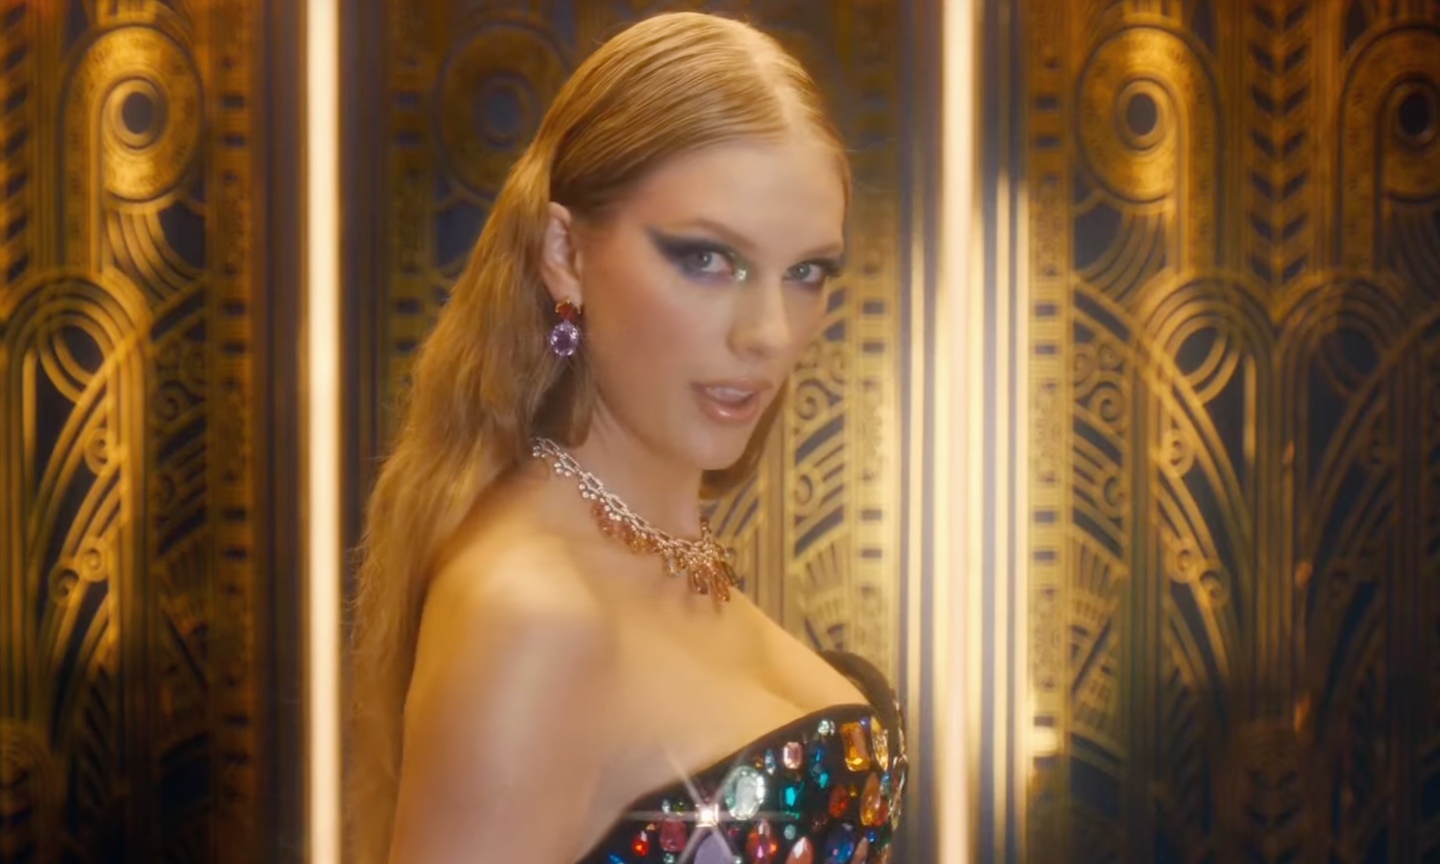 Taylor Swift Tells A Cinderella Story In Star-Studded 'Bejeweled' Video